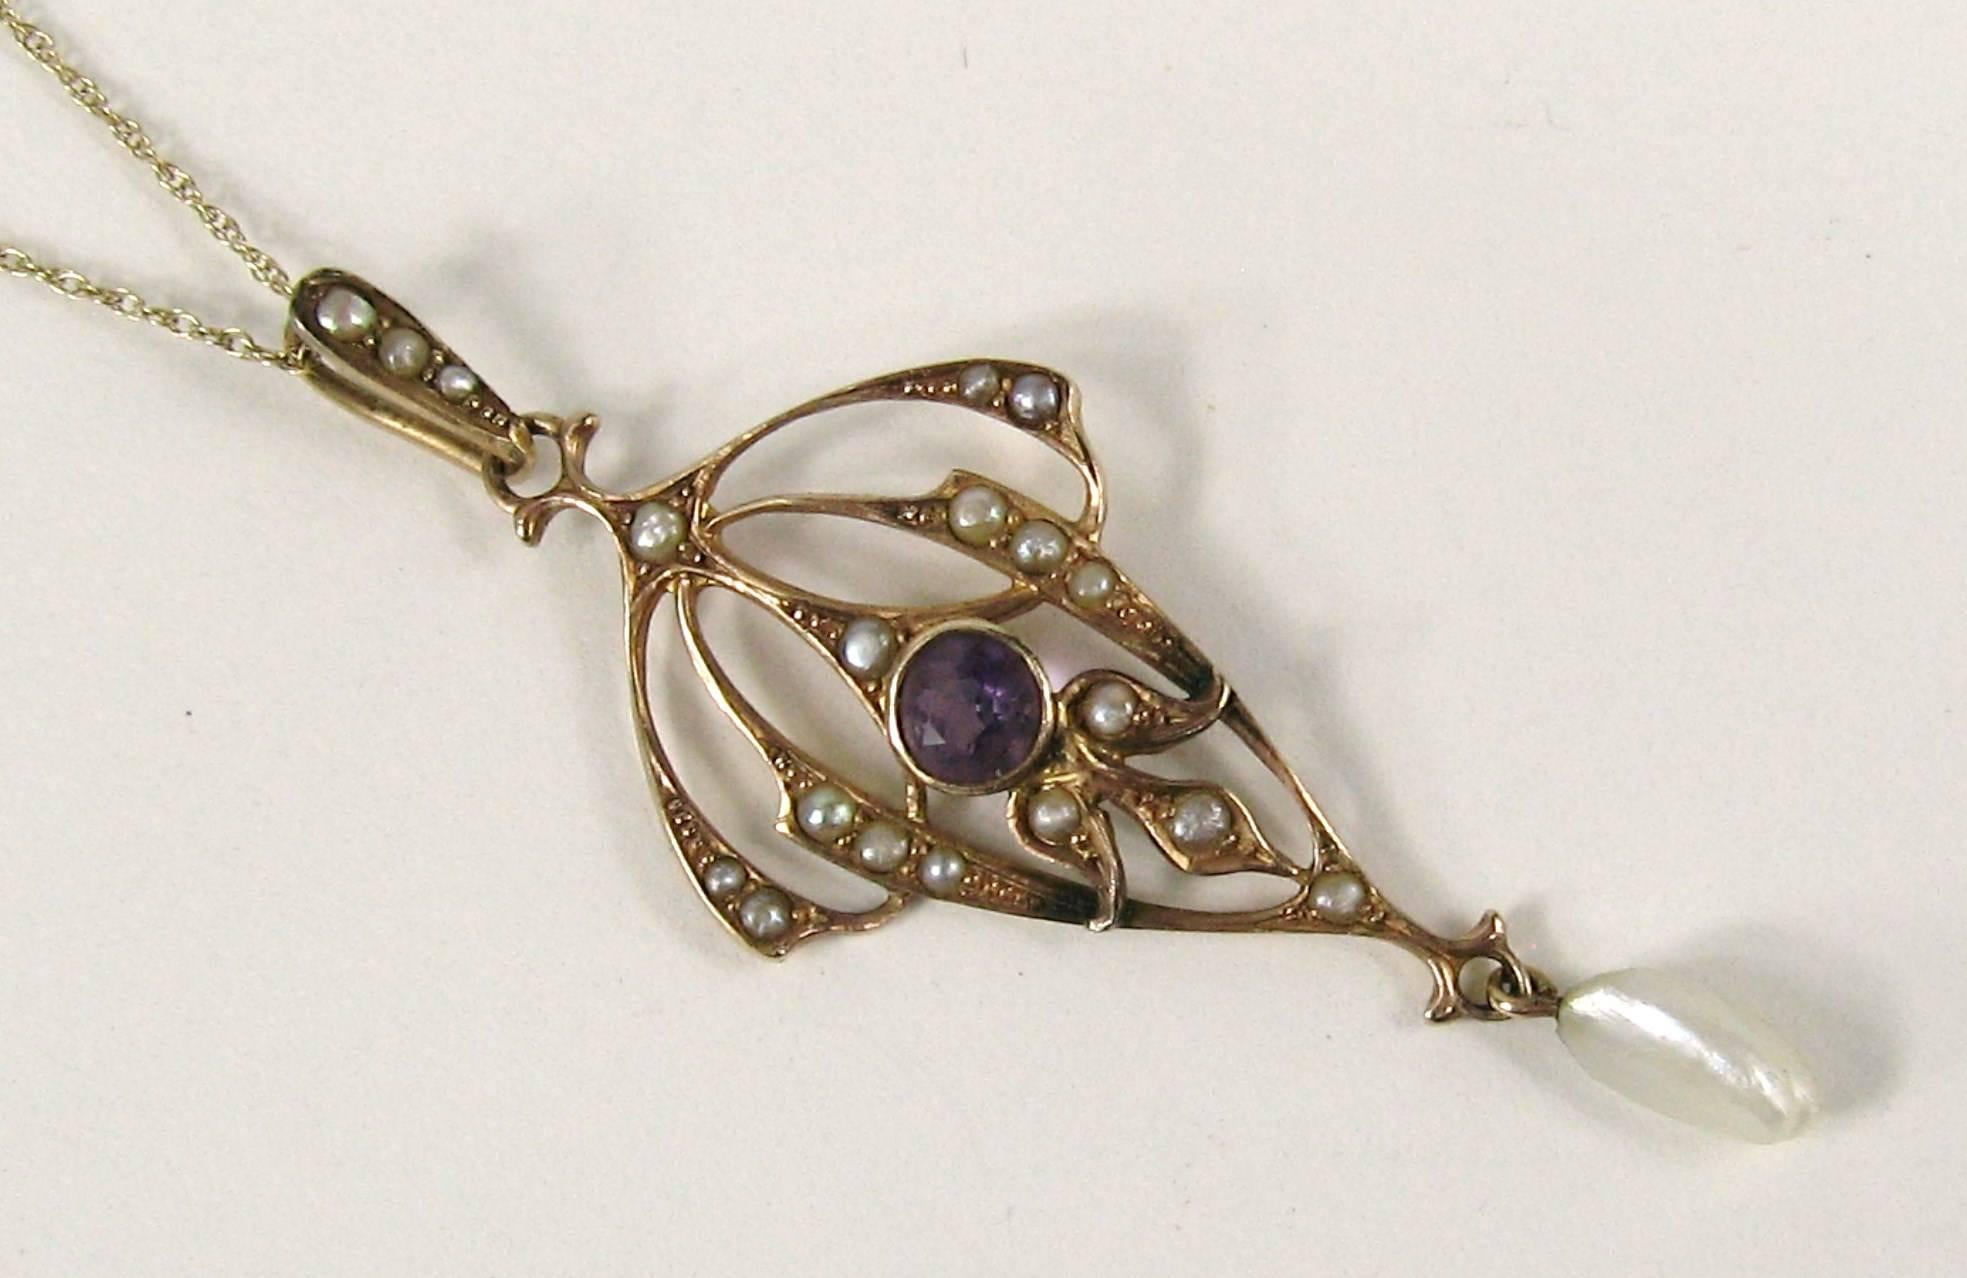 Superb Victorian era lavalier circa 1860s crafted beautifully in 14k yellow gold. Center is a bezel set Amethyst with delicate seed pearls scattered. 1 Dangling seed pearl. Measuring 1.82 inches top of bale to seed pearl. On a delicate 14k gold